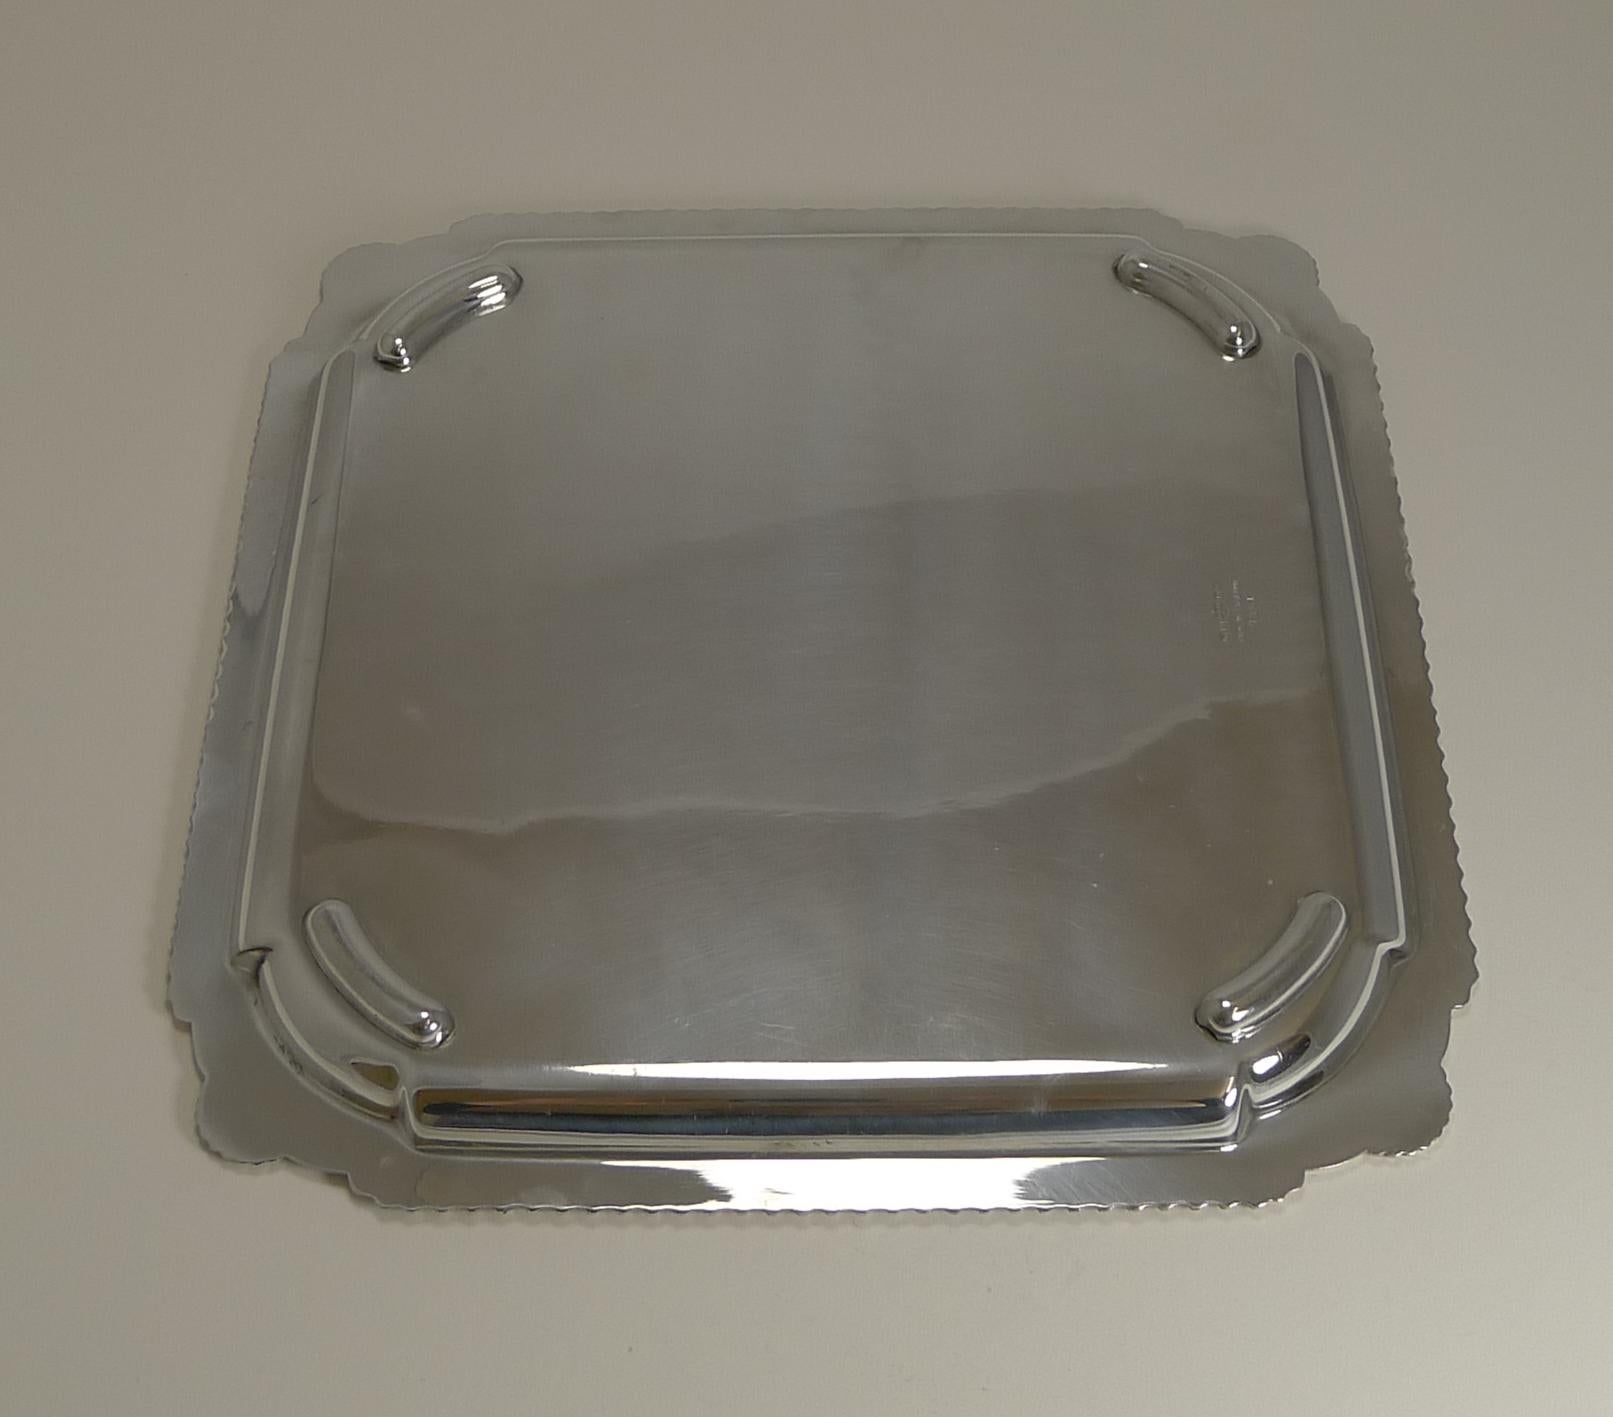 A fine English silver plated square tray or salver, perfect to serve drinks and a perfect bar accessory.

The underside is where the full mark can be found for Davis and Son of Glasgow together with EPNS for Electro plated nickel silver and made